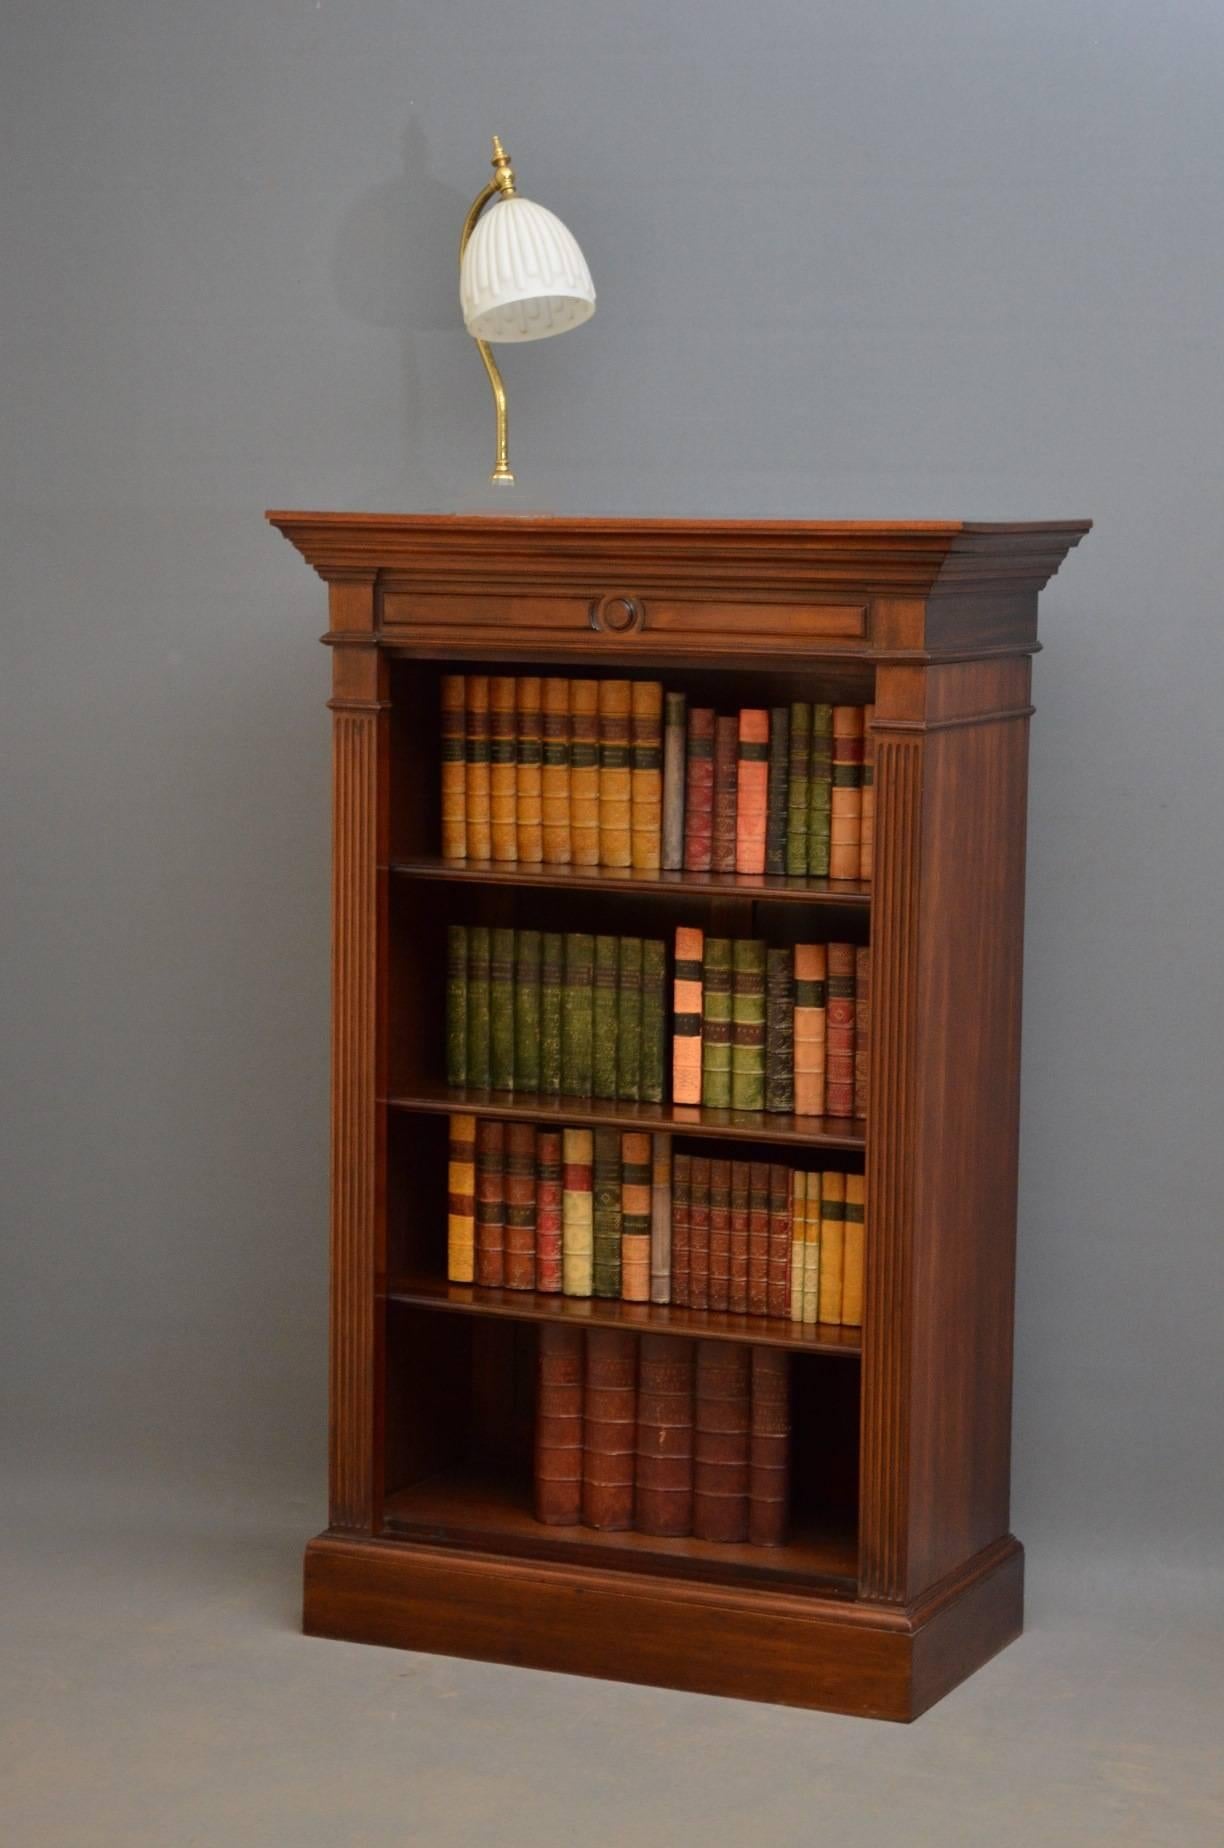 Sn3450, Victorian mahogany open bookcase of slim design, having moulded top above moulded frieze and three height adjustable shelves flanked by reeded pilasters, all standing on moulded plinth base. This antique bookcase or bookshelves is in